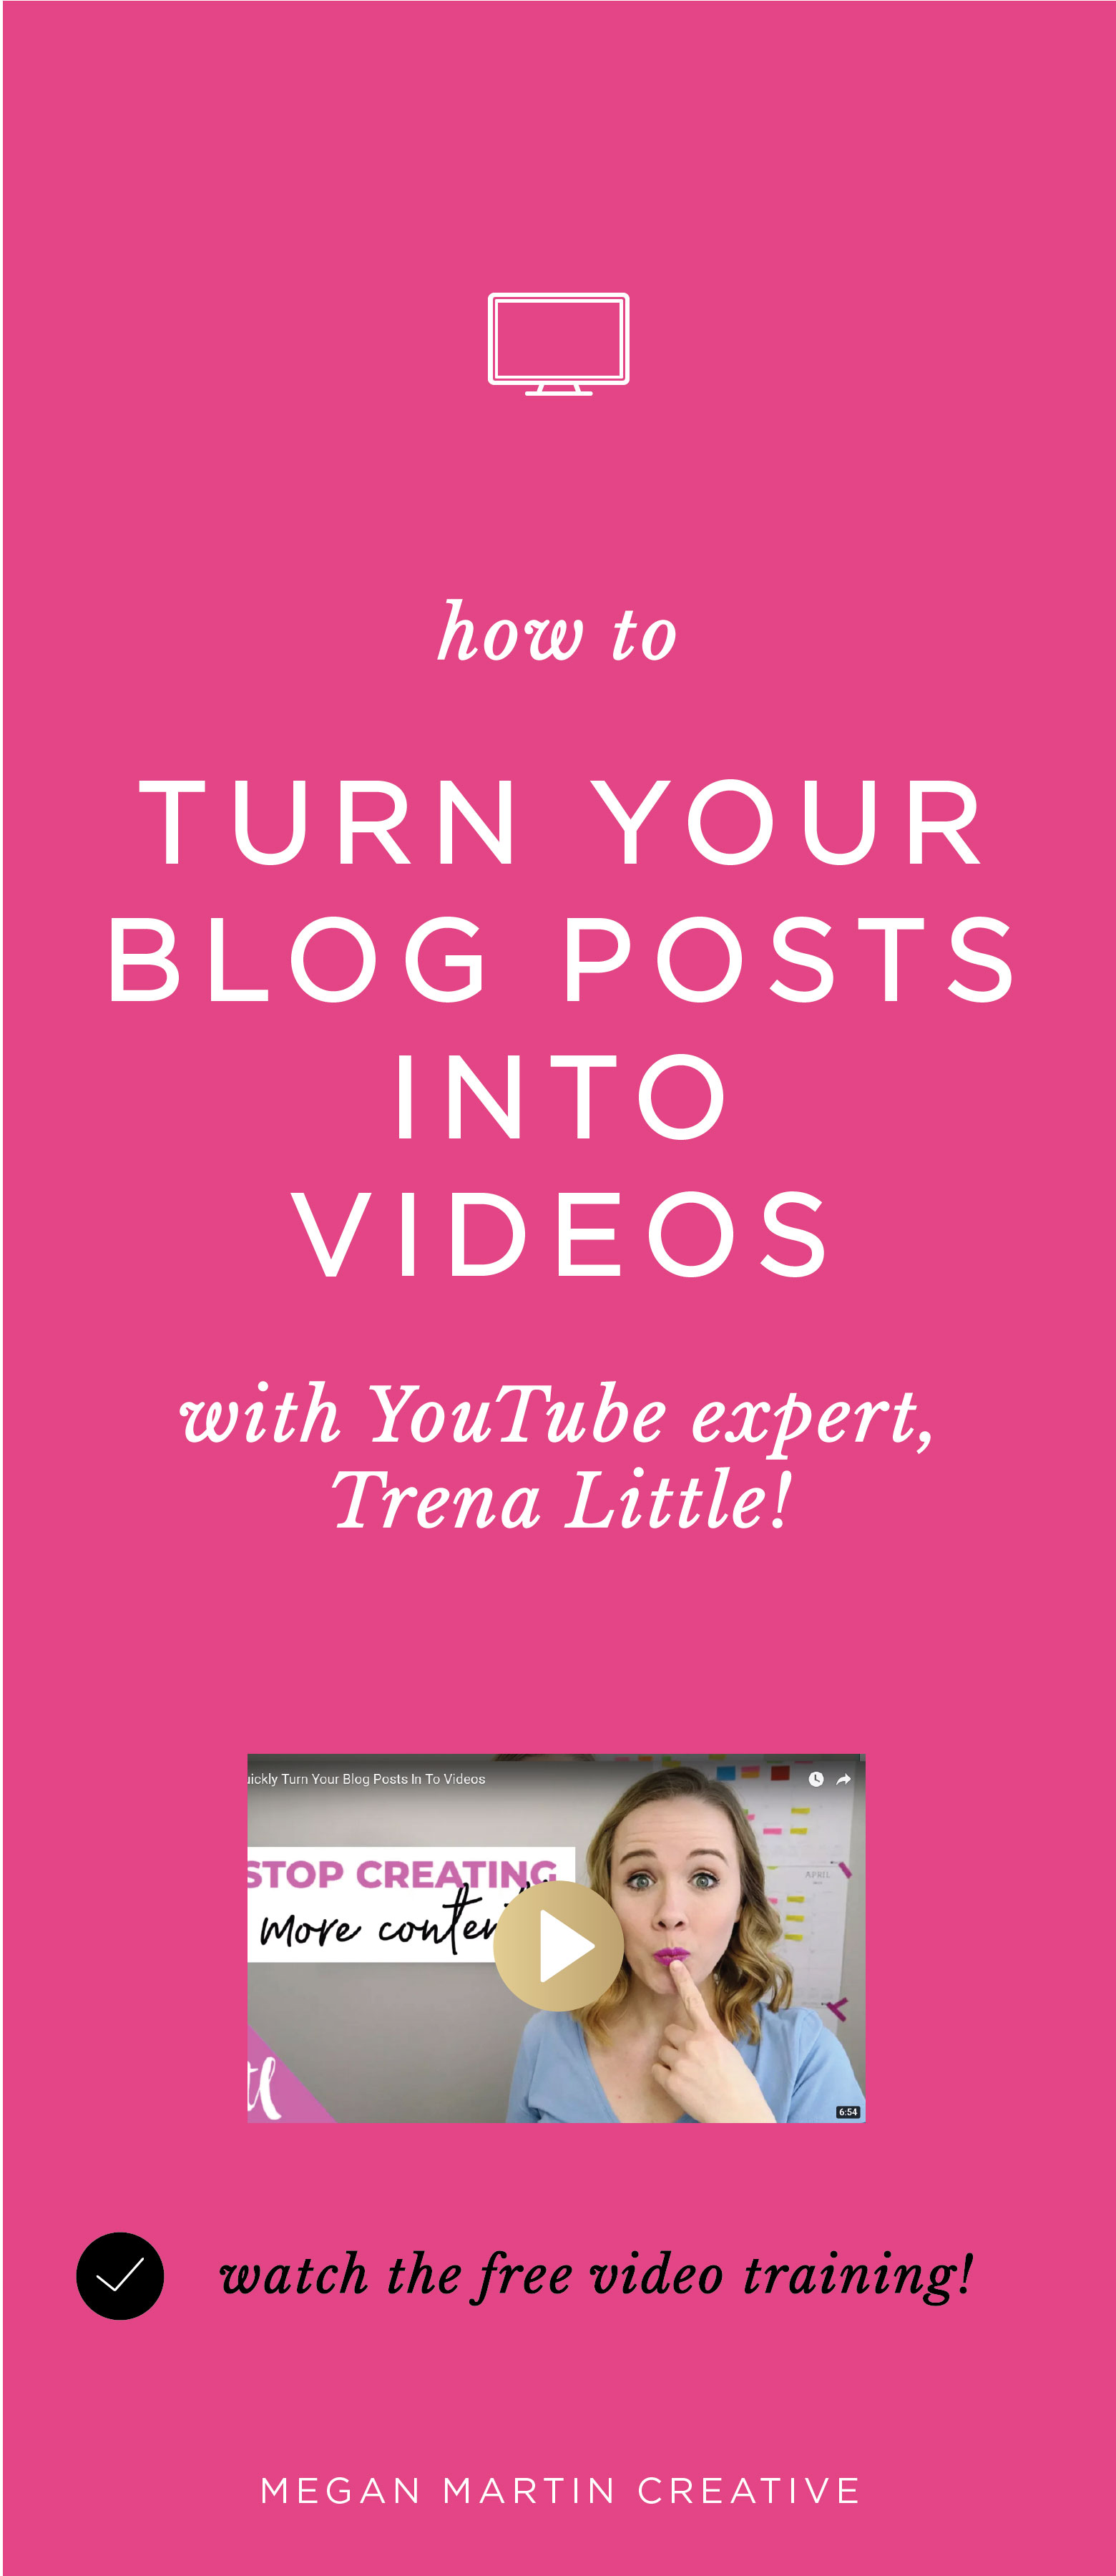 How to Turn Your Blog Posts into Video with guest YouTube expert, Trena Little. On Megan Martin Creative. Marketing, Blog, Blogger Tips, YouTube tips, video marketing, content marketing, how to grow your blog, how to get youtube subscribers